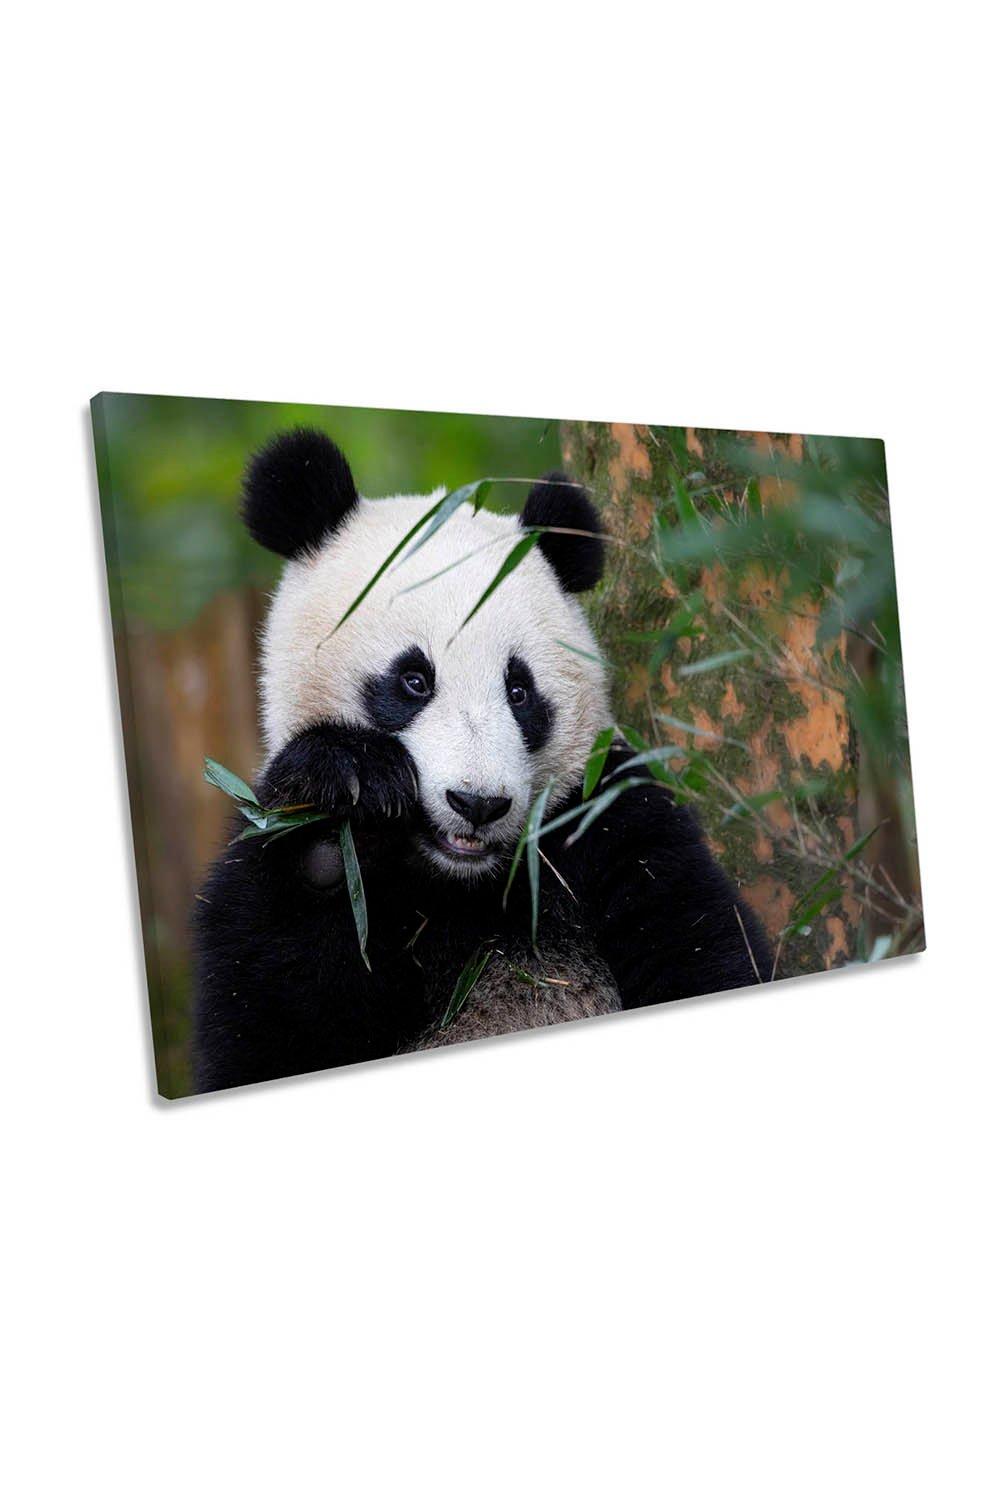 Bamboo Time Panda Cute Canvas Wall Art Picture Print